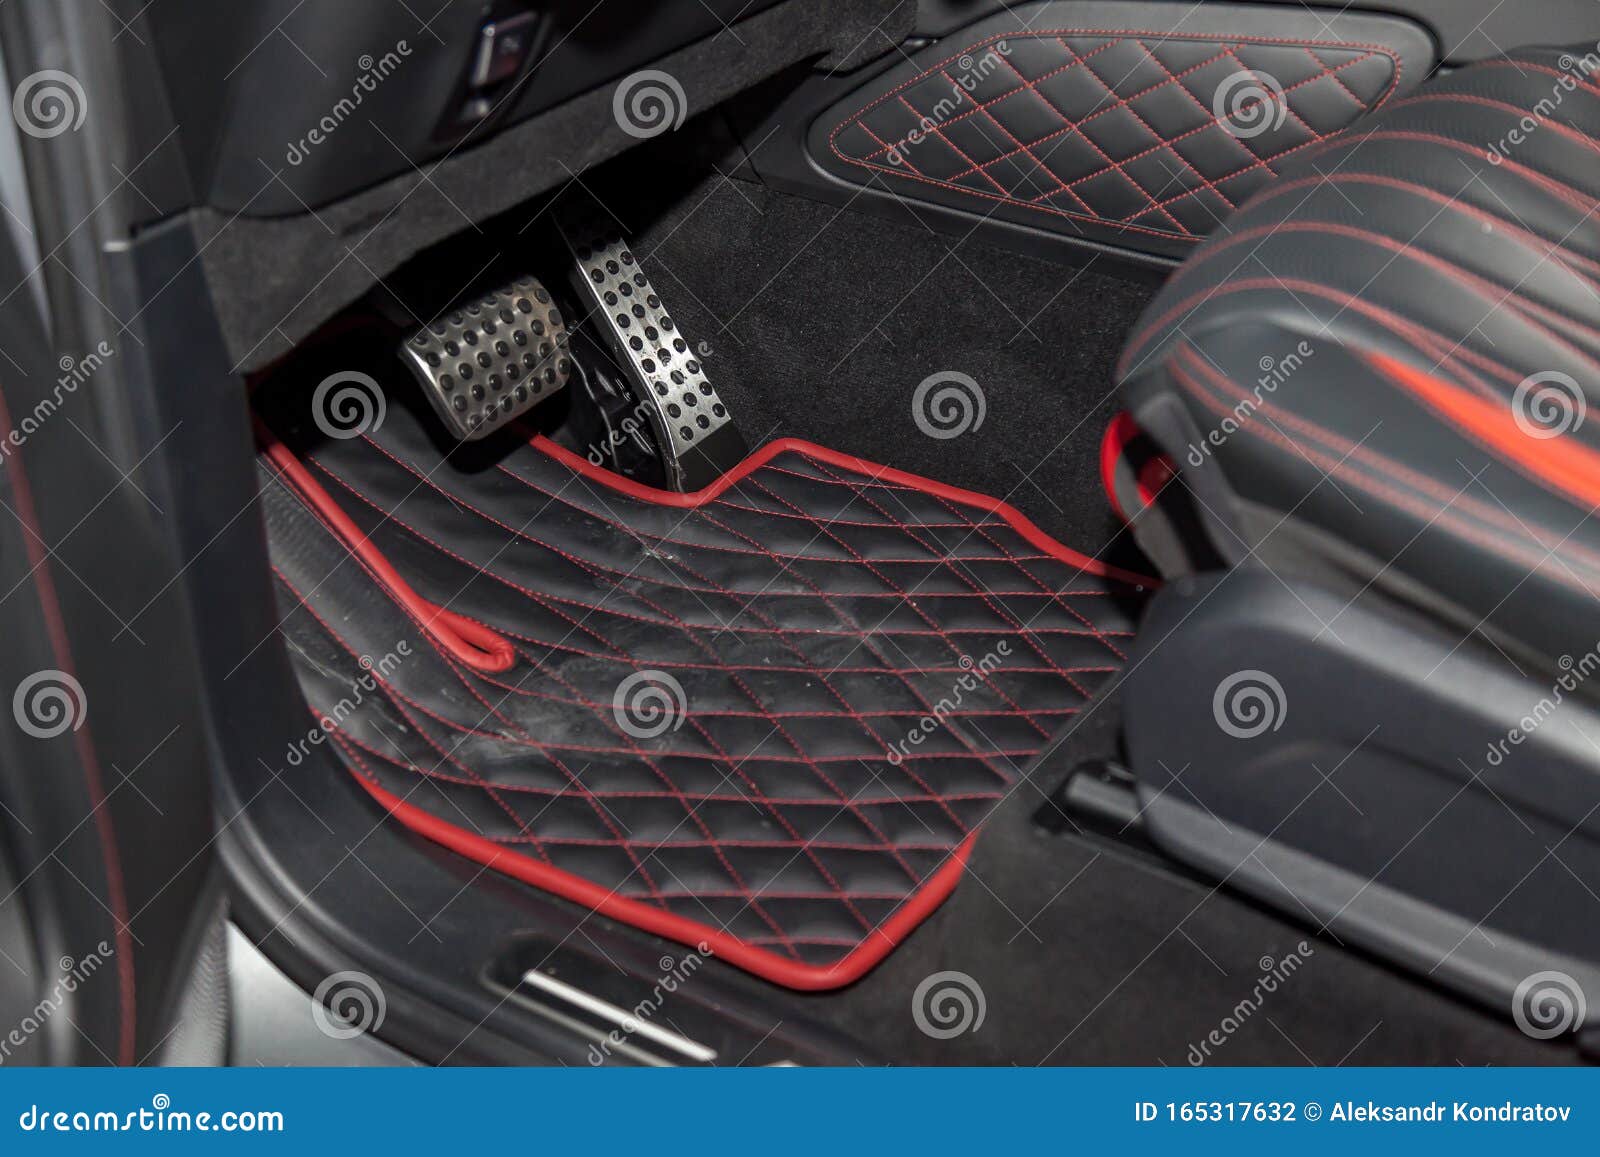 Dirty Car Floor Mats Of Black Rubber With Gas Pedals And Brakes In